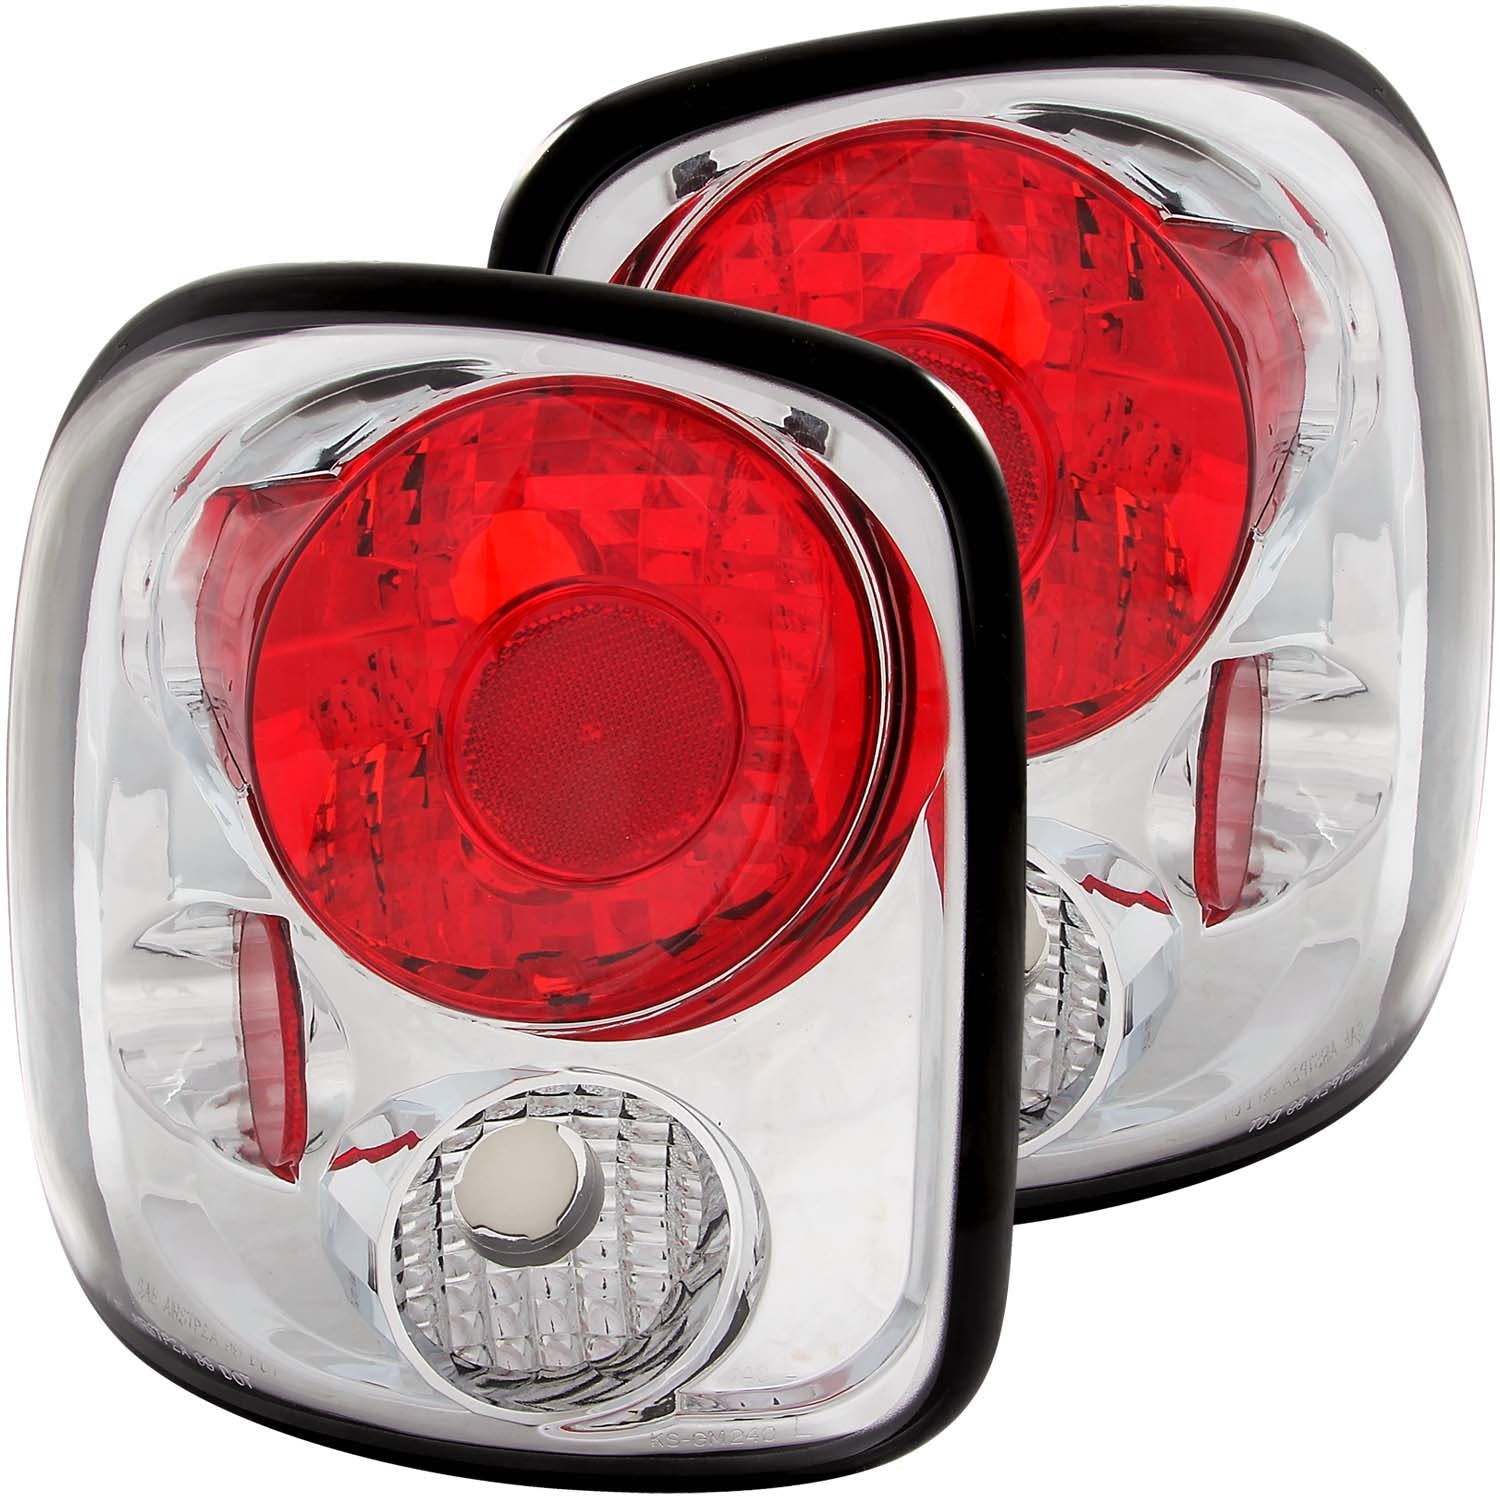 AnzoUSA 211026 Taillights Chrome